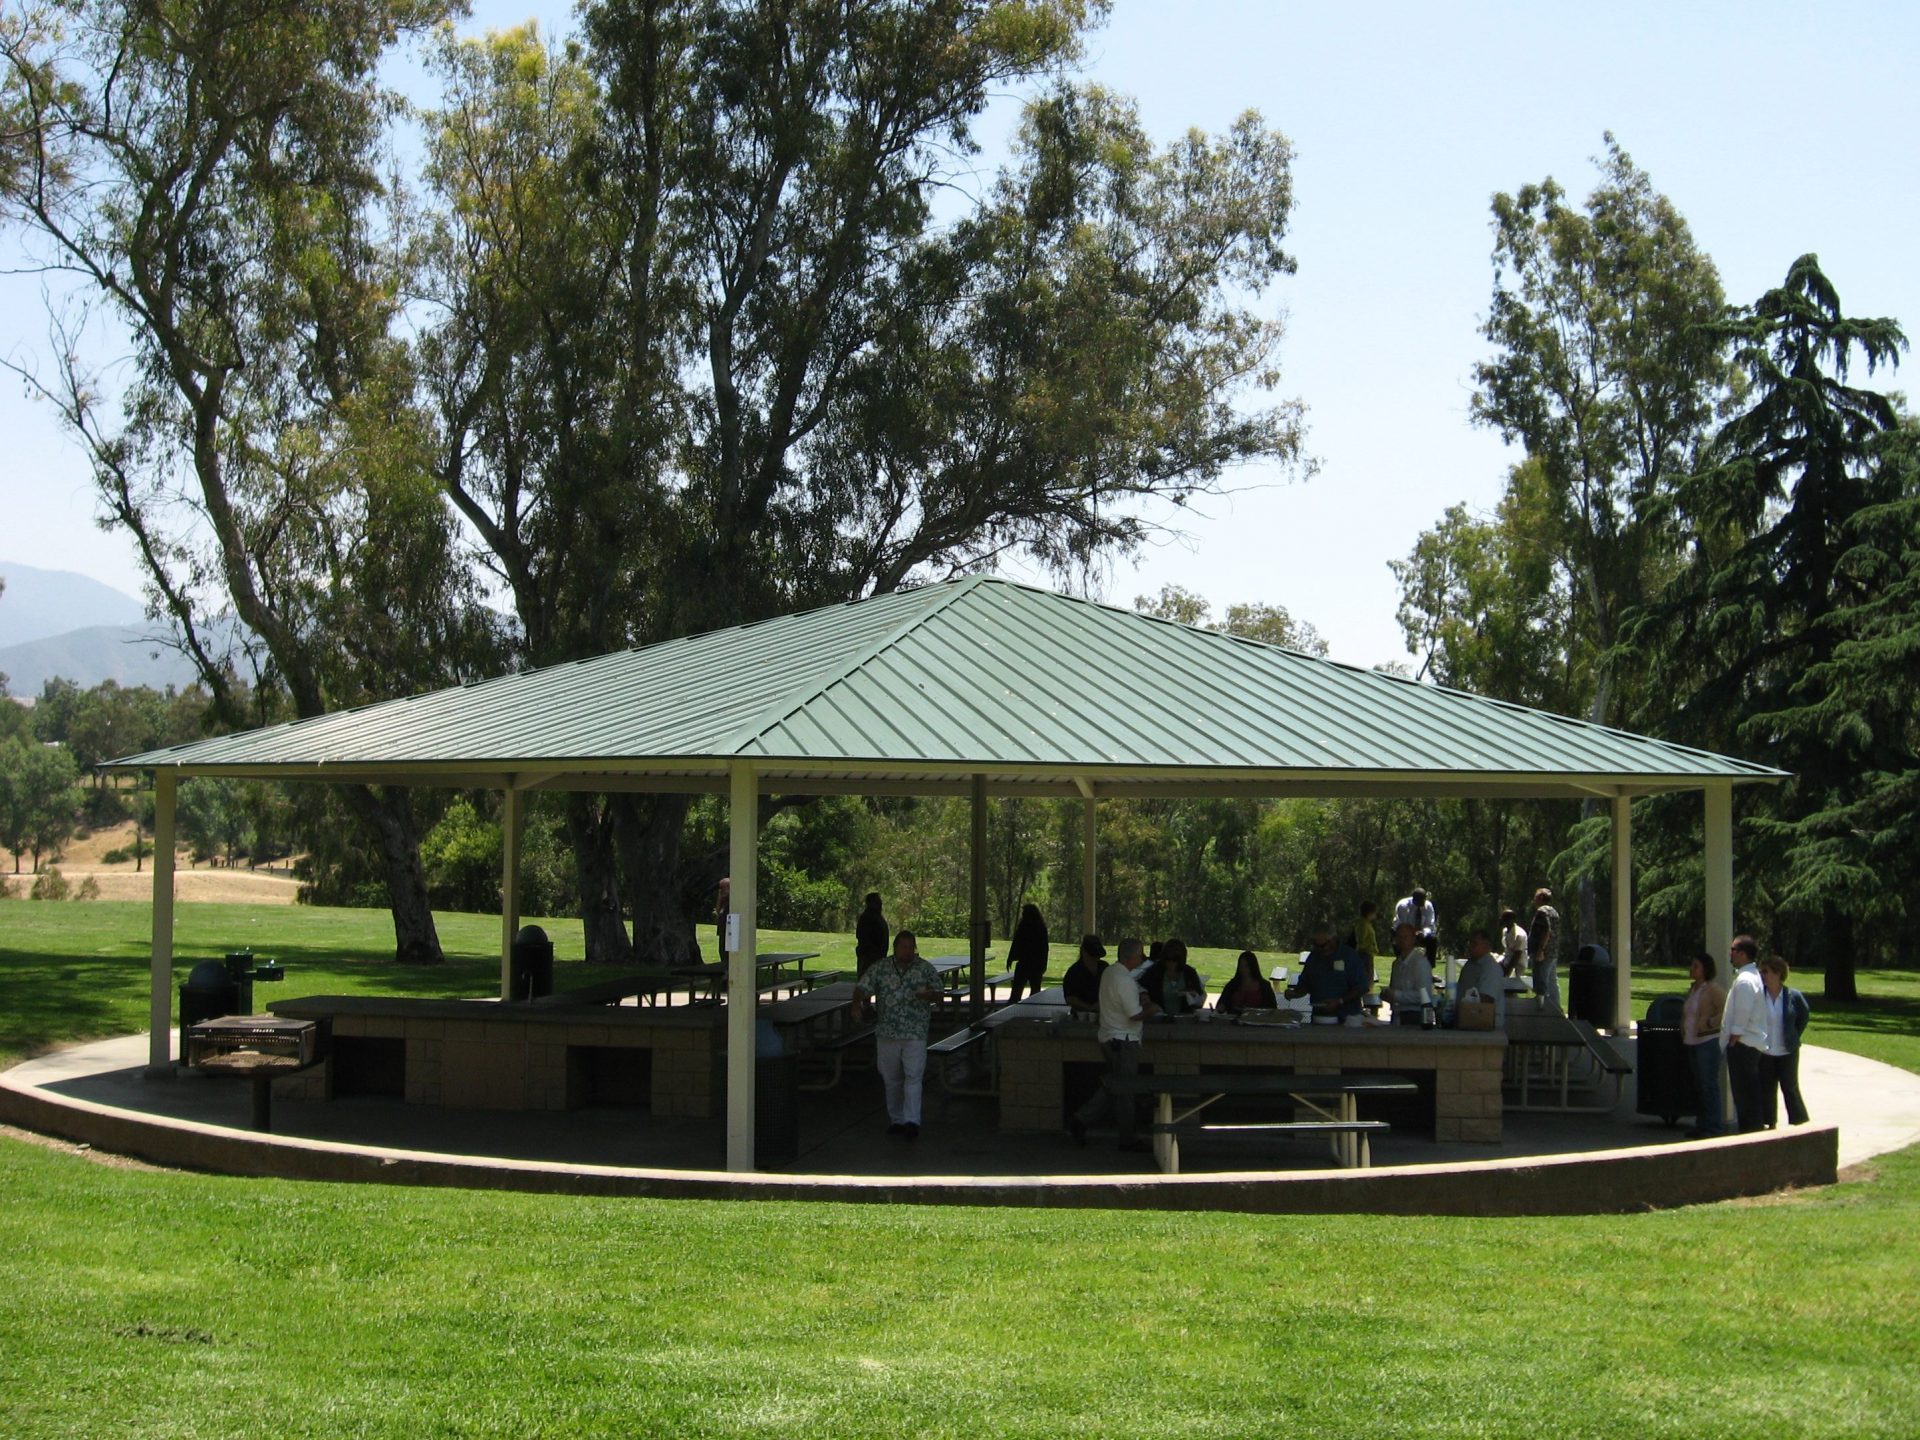 Grill and Shelter at park